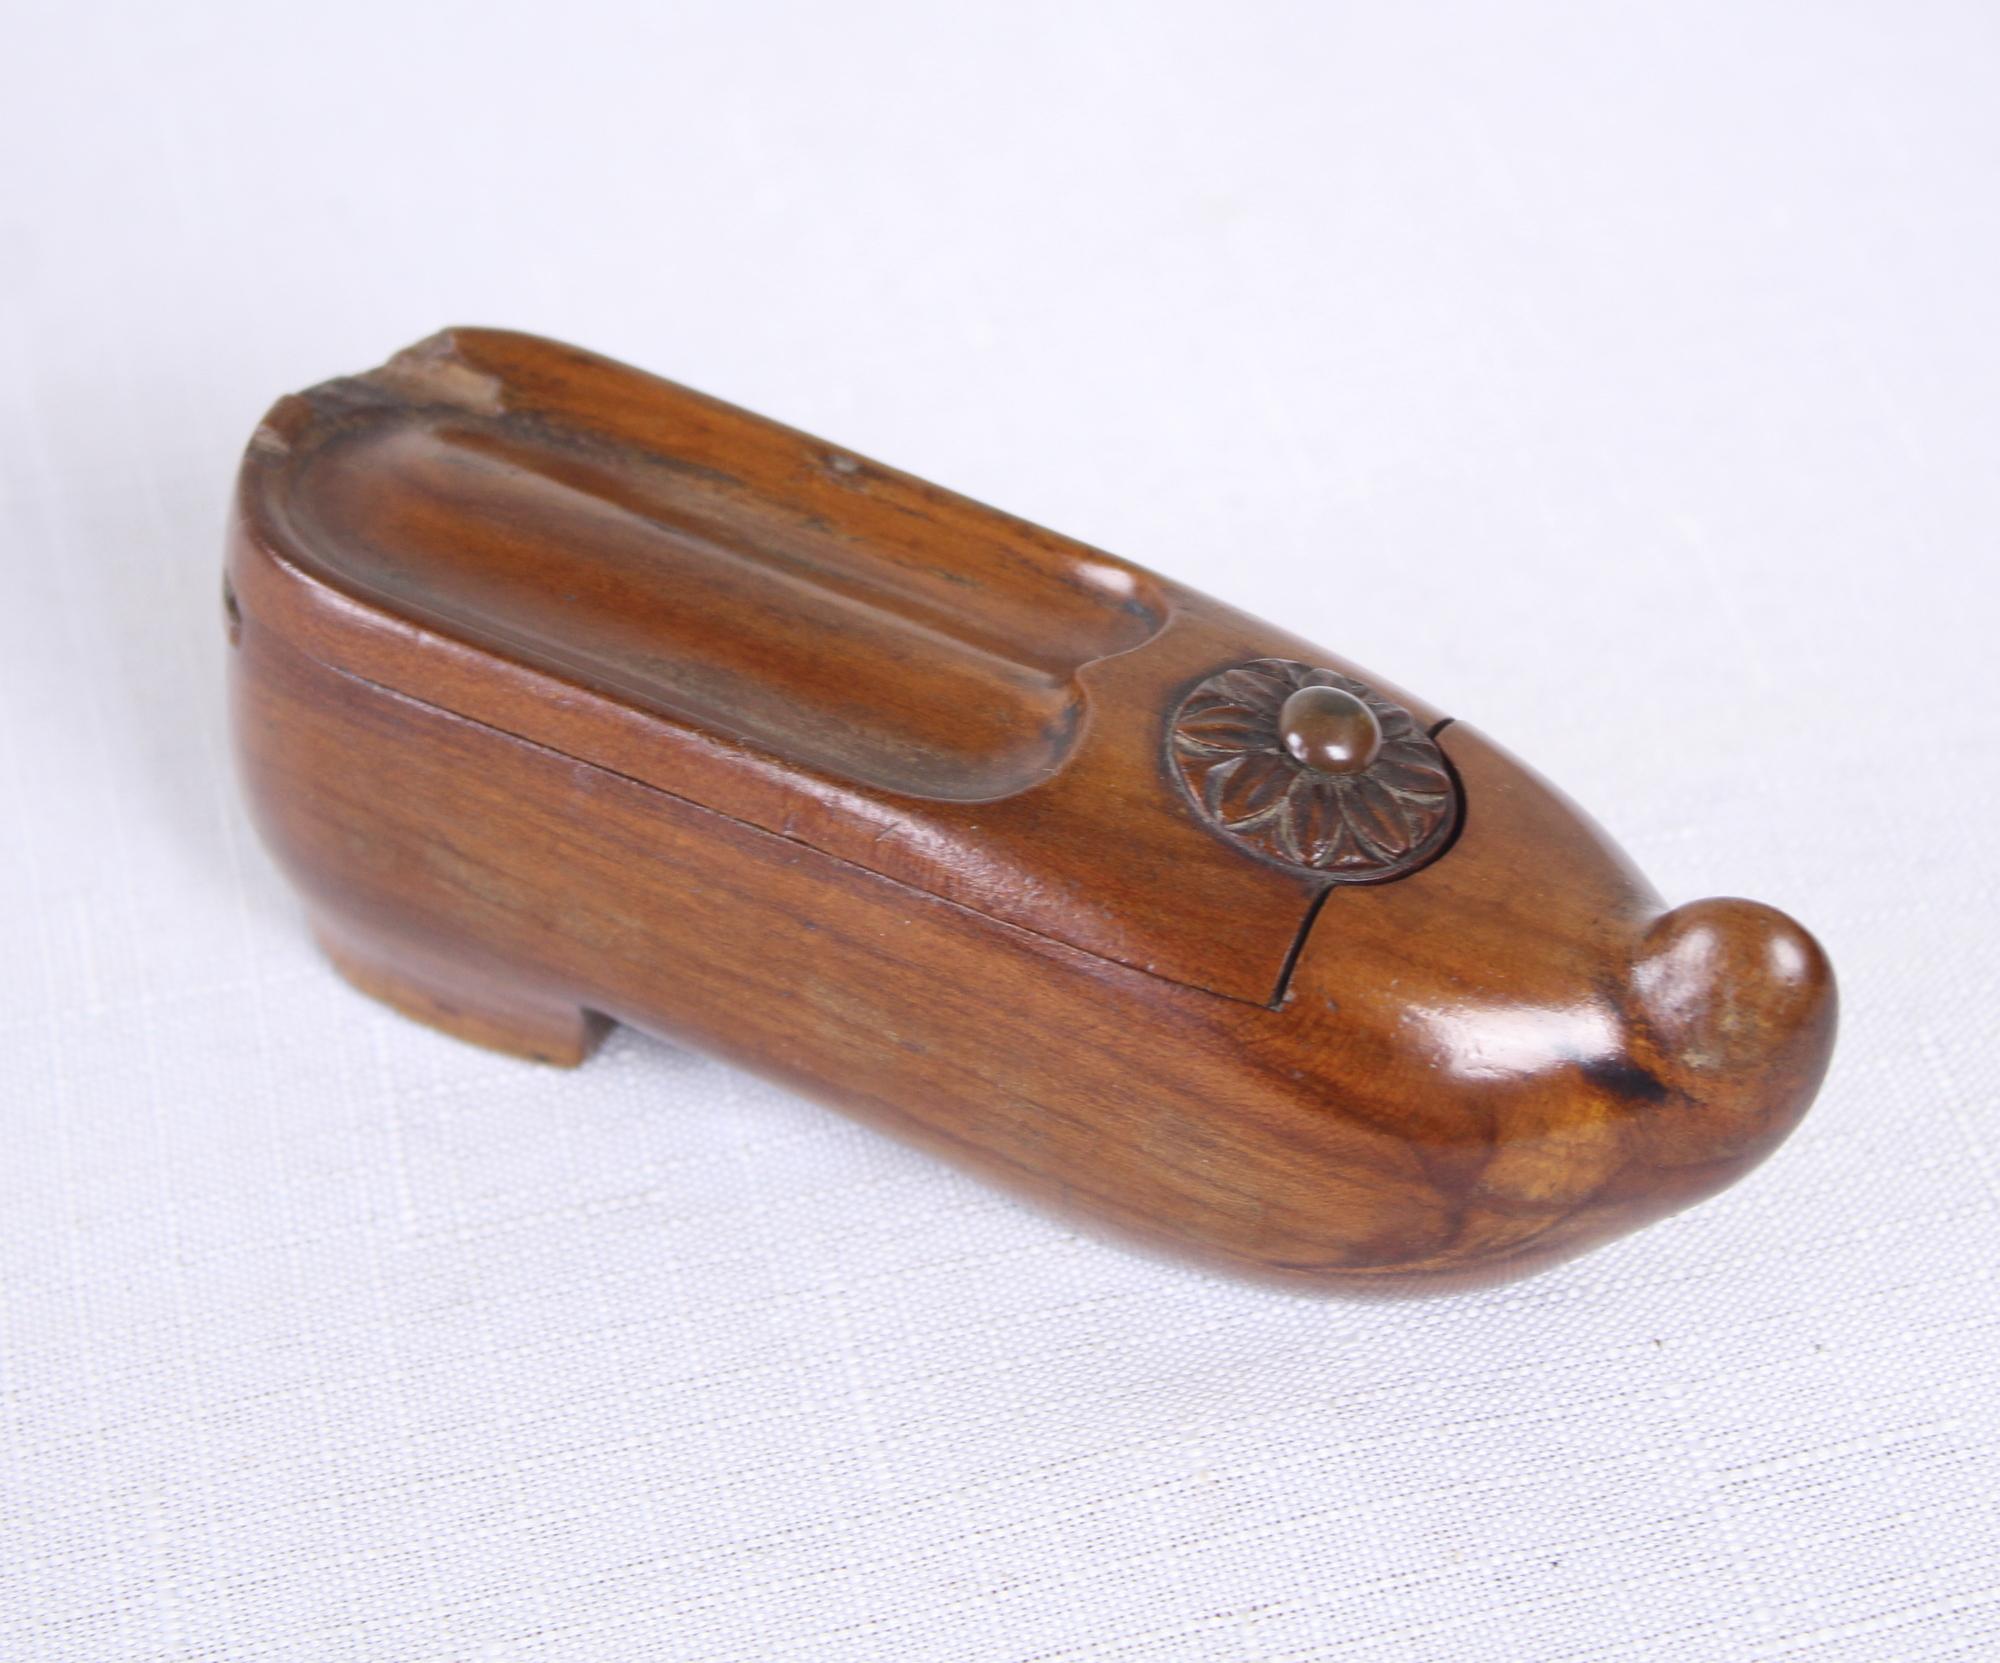 Novelty carved snuff box in the form of a shoe. Opening sliding top with decorative carved roundel. Slight chip on the back, but otherwise in good condition. Lovely color and patina. We believe it to be fashioned of mahogany.